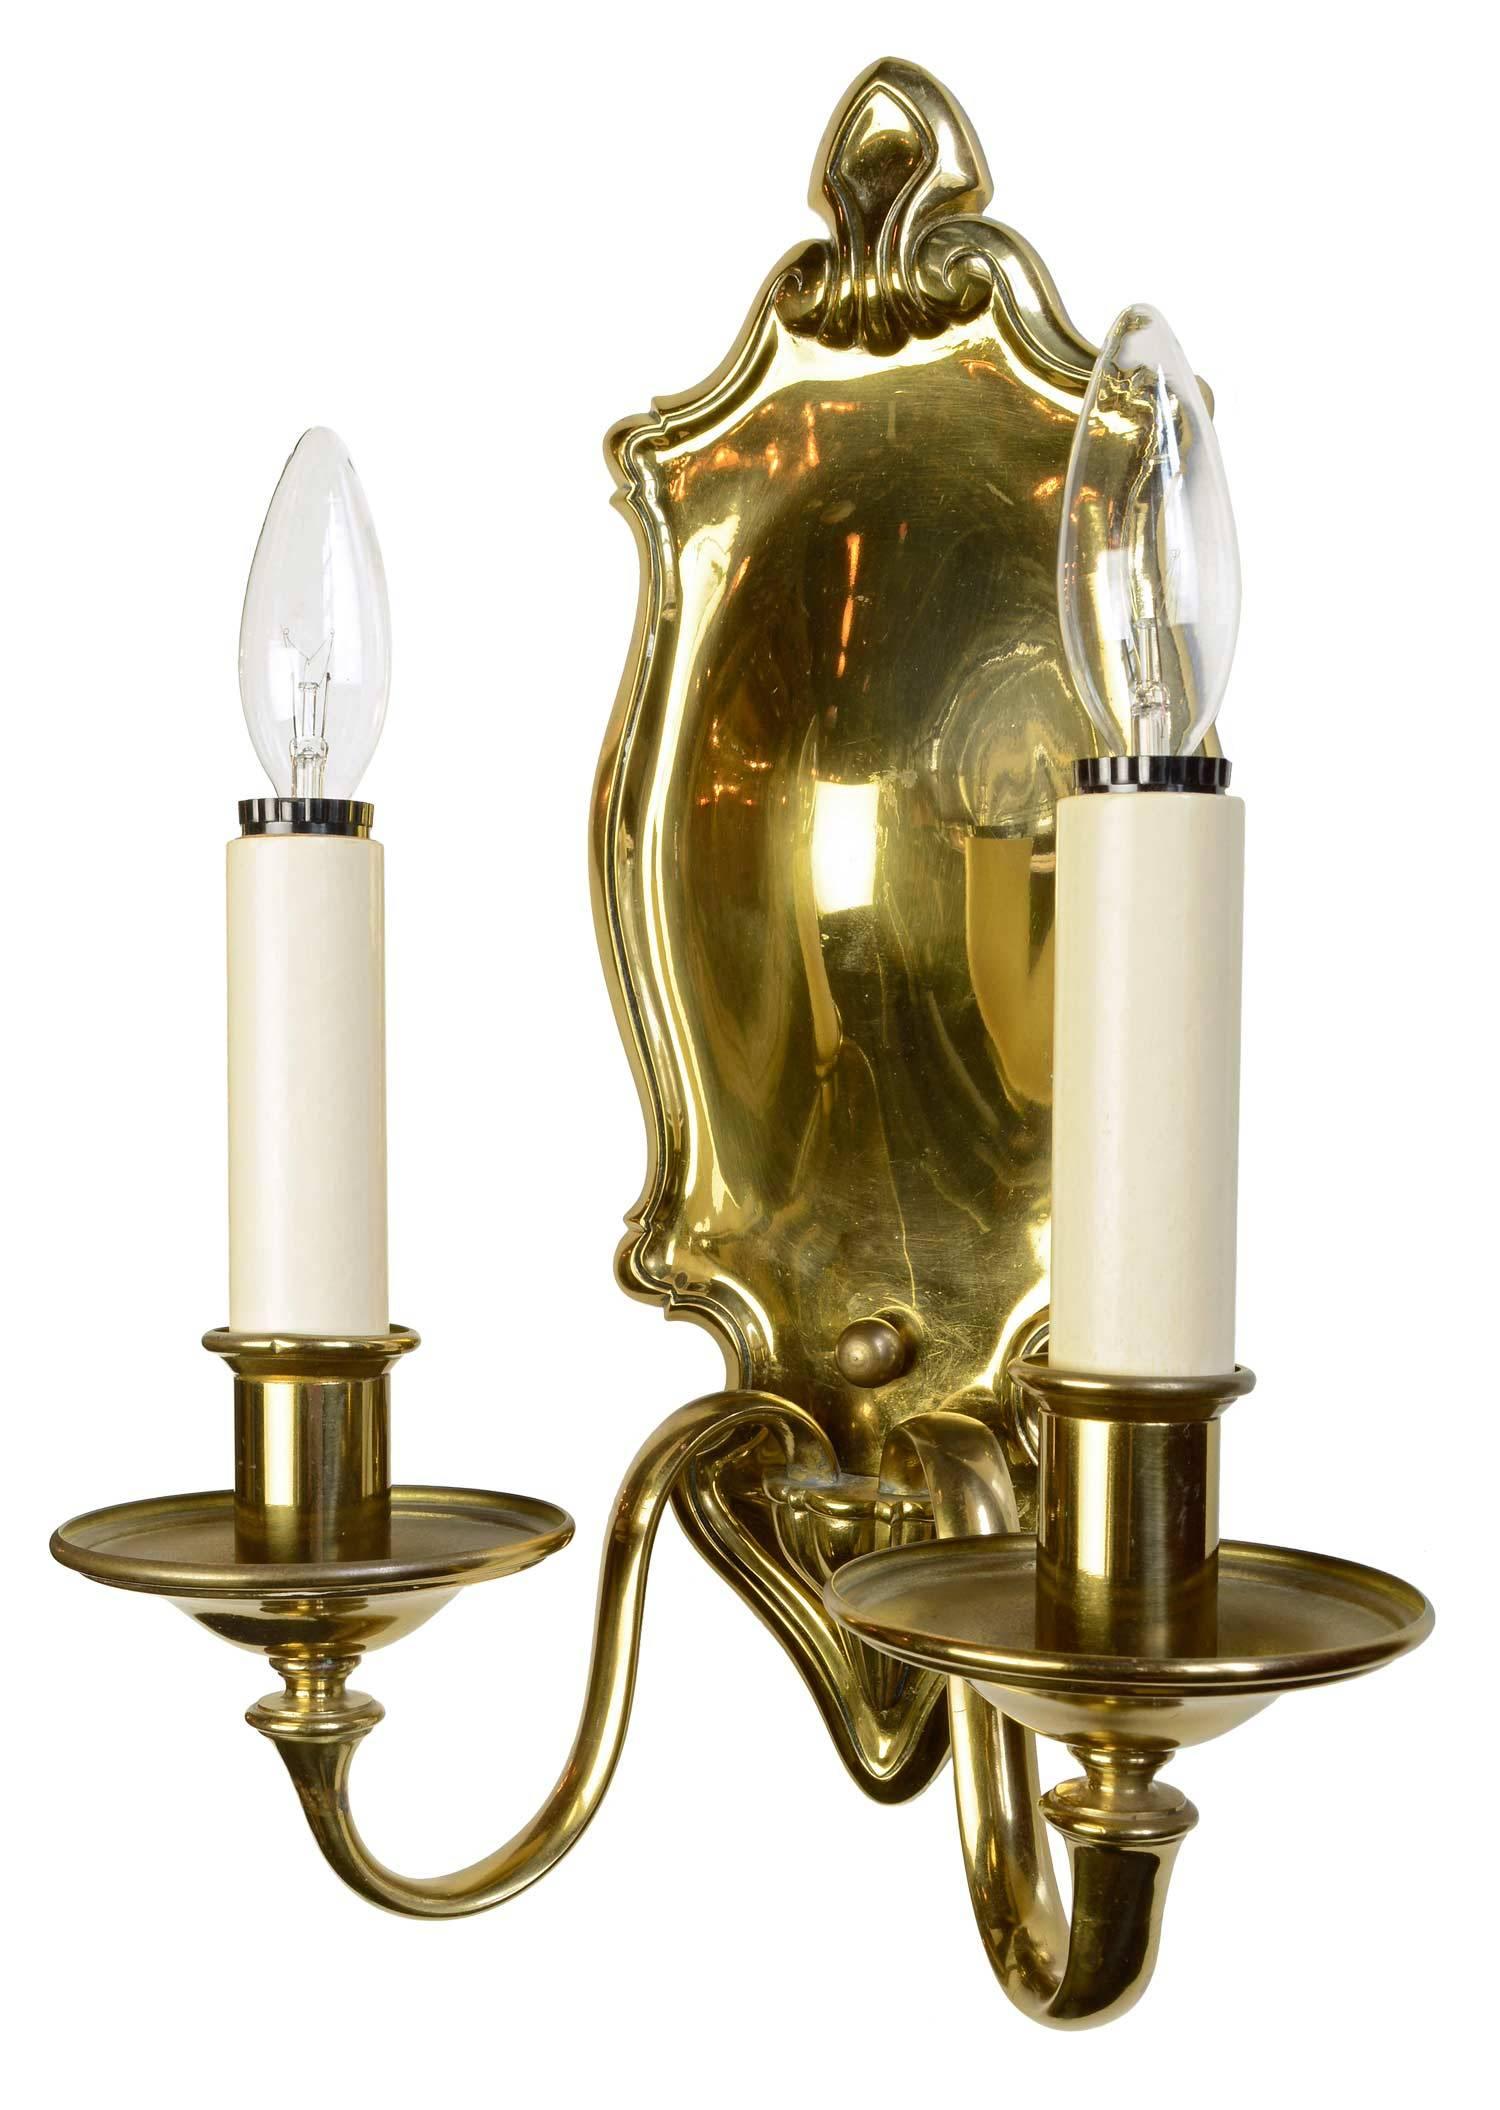 This pair of oversized cast brass two-arm Colonial Revival sconces, created circa 1920s, are signed Bradley & Hubbard, a company known for its quality of craftsmanship. The simplicity of design and convex shaped backplate reflects light from its